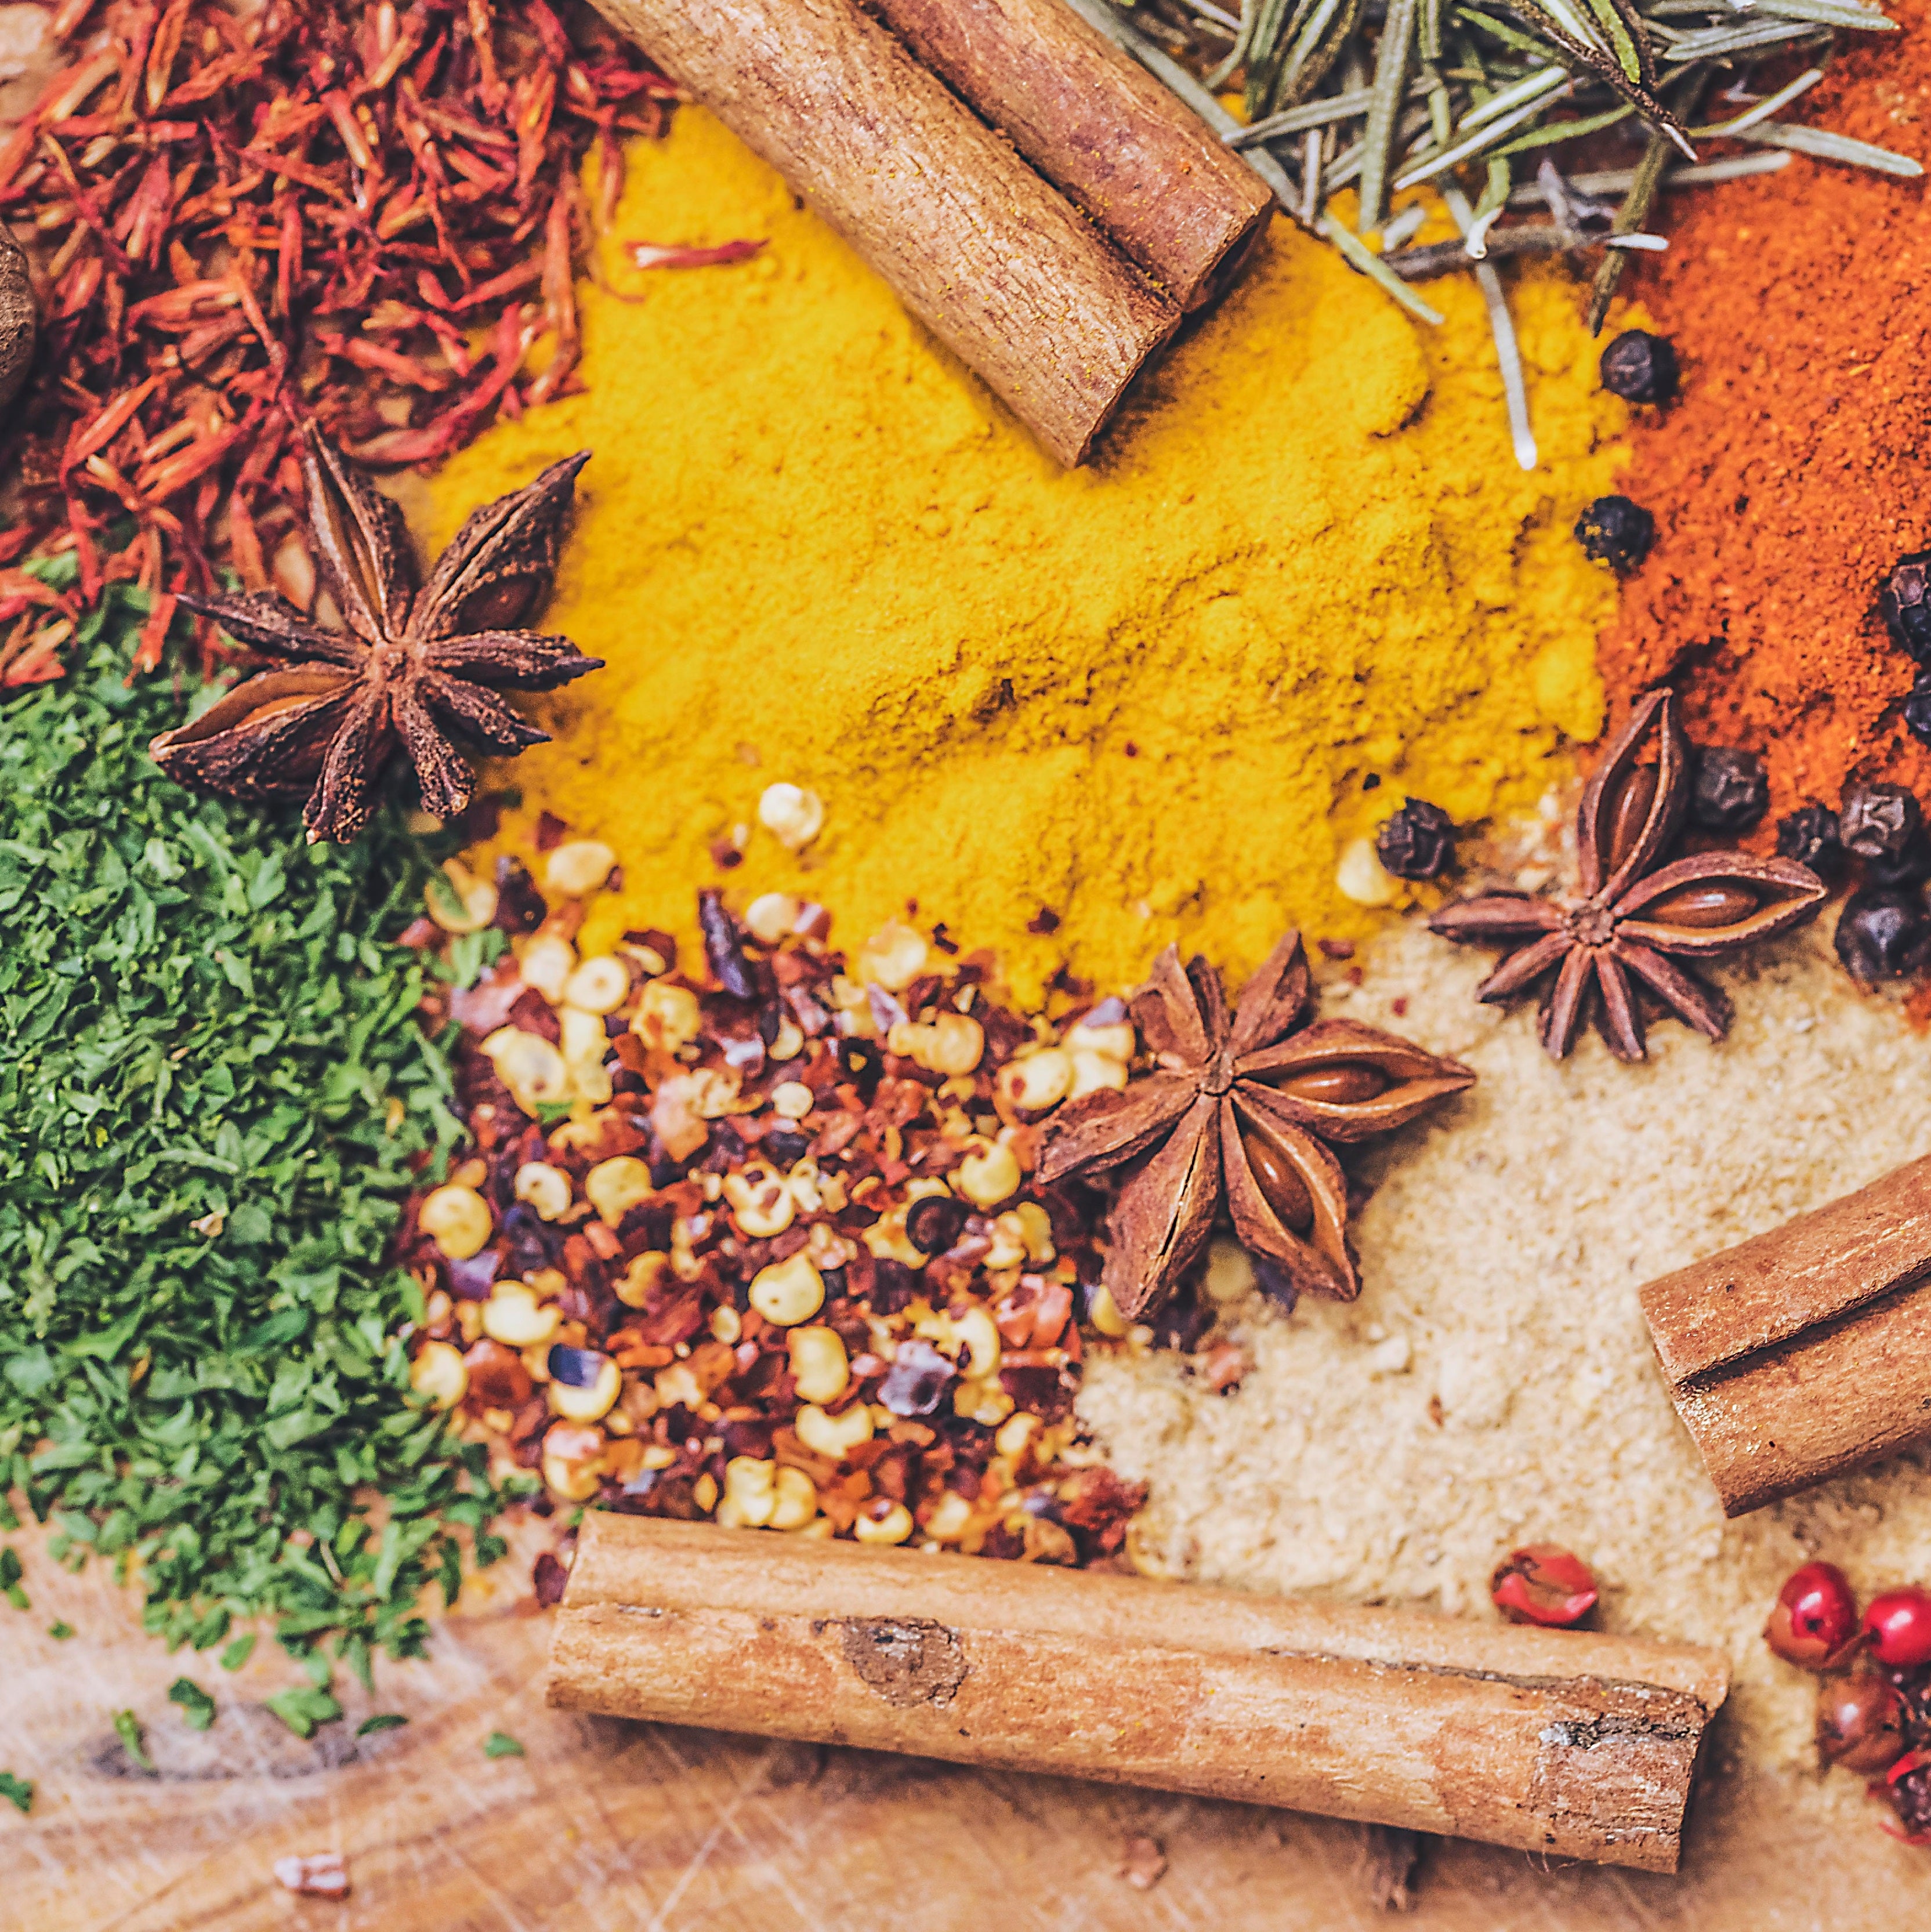 Dry Goods & Spices